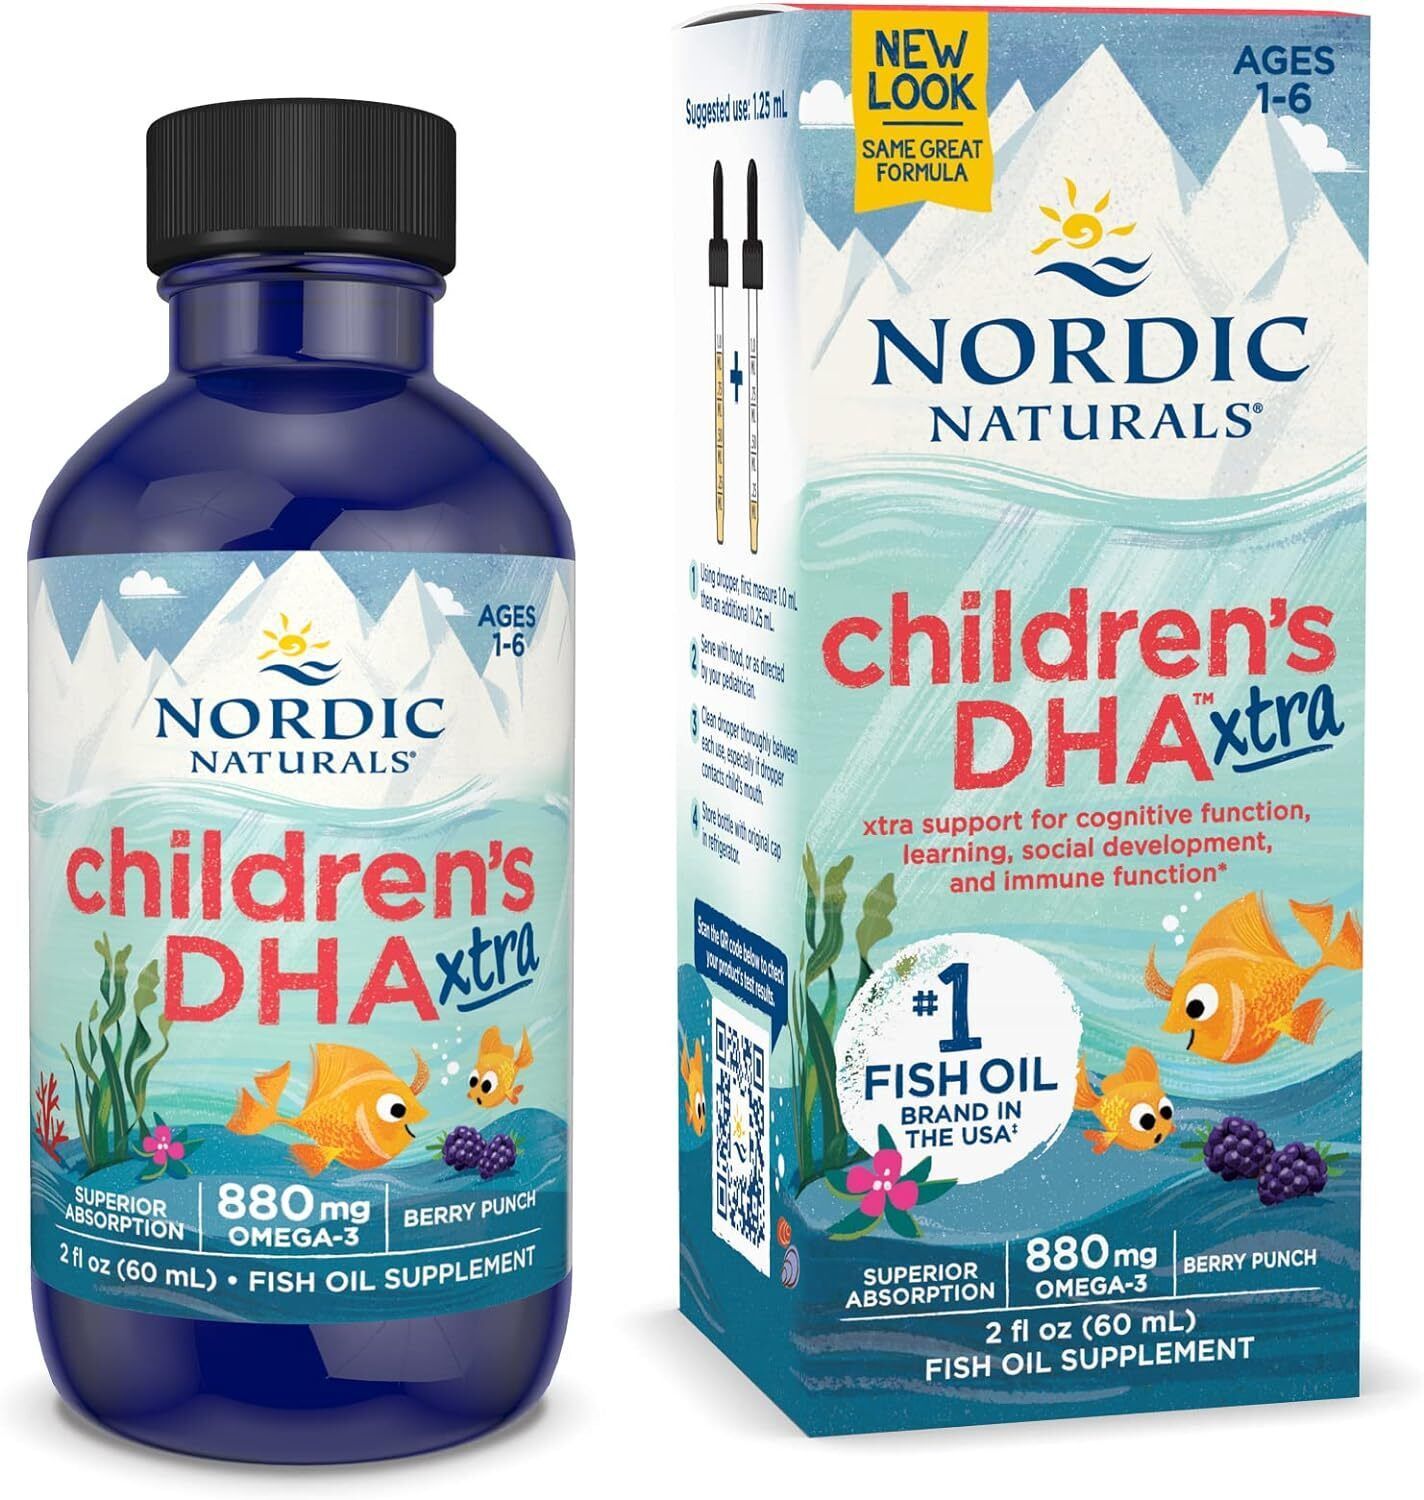 Primary image for Nordic Naturals Children’s DHA Xtra, Berry Punch - 2 oz for Kids - 880 mg Total